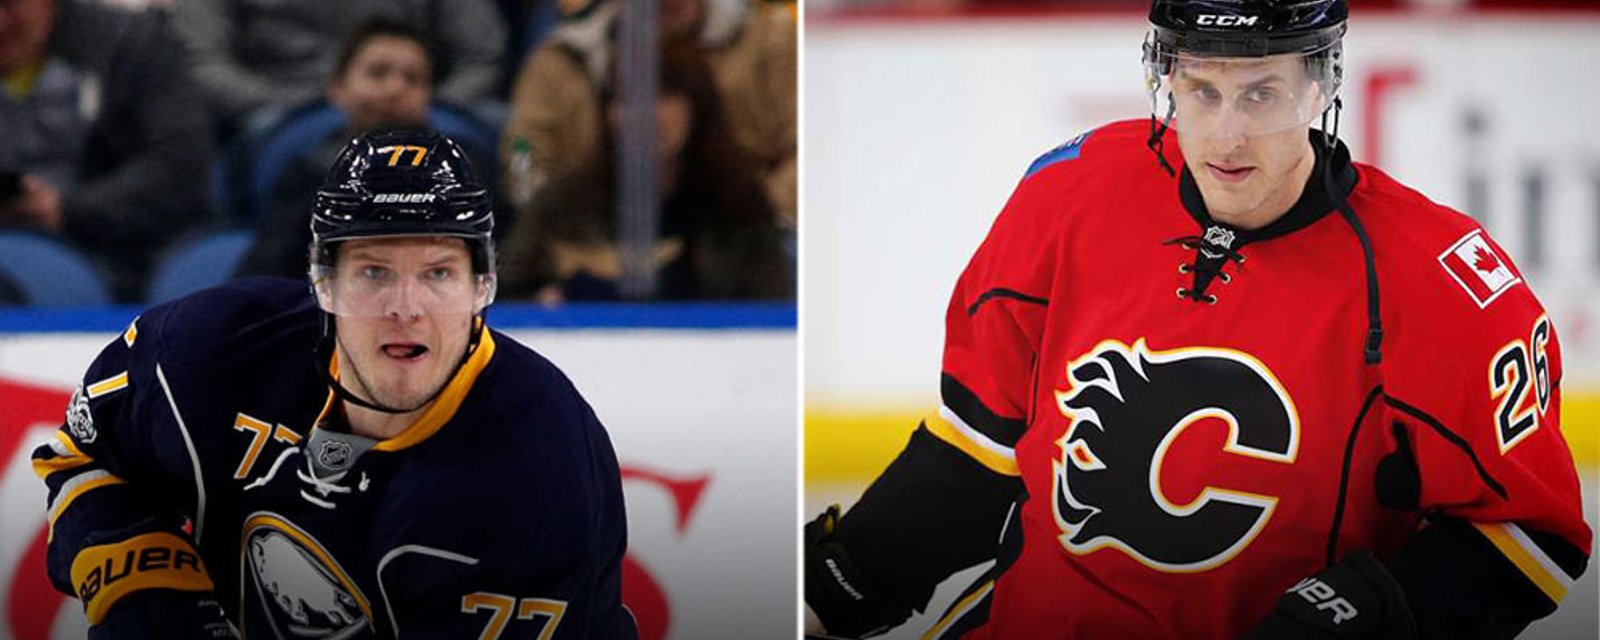 Report: Kulikov and Stone could initiate bidding war